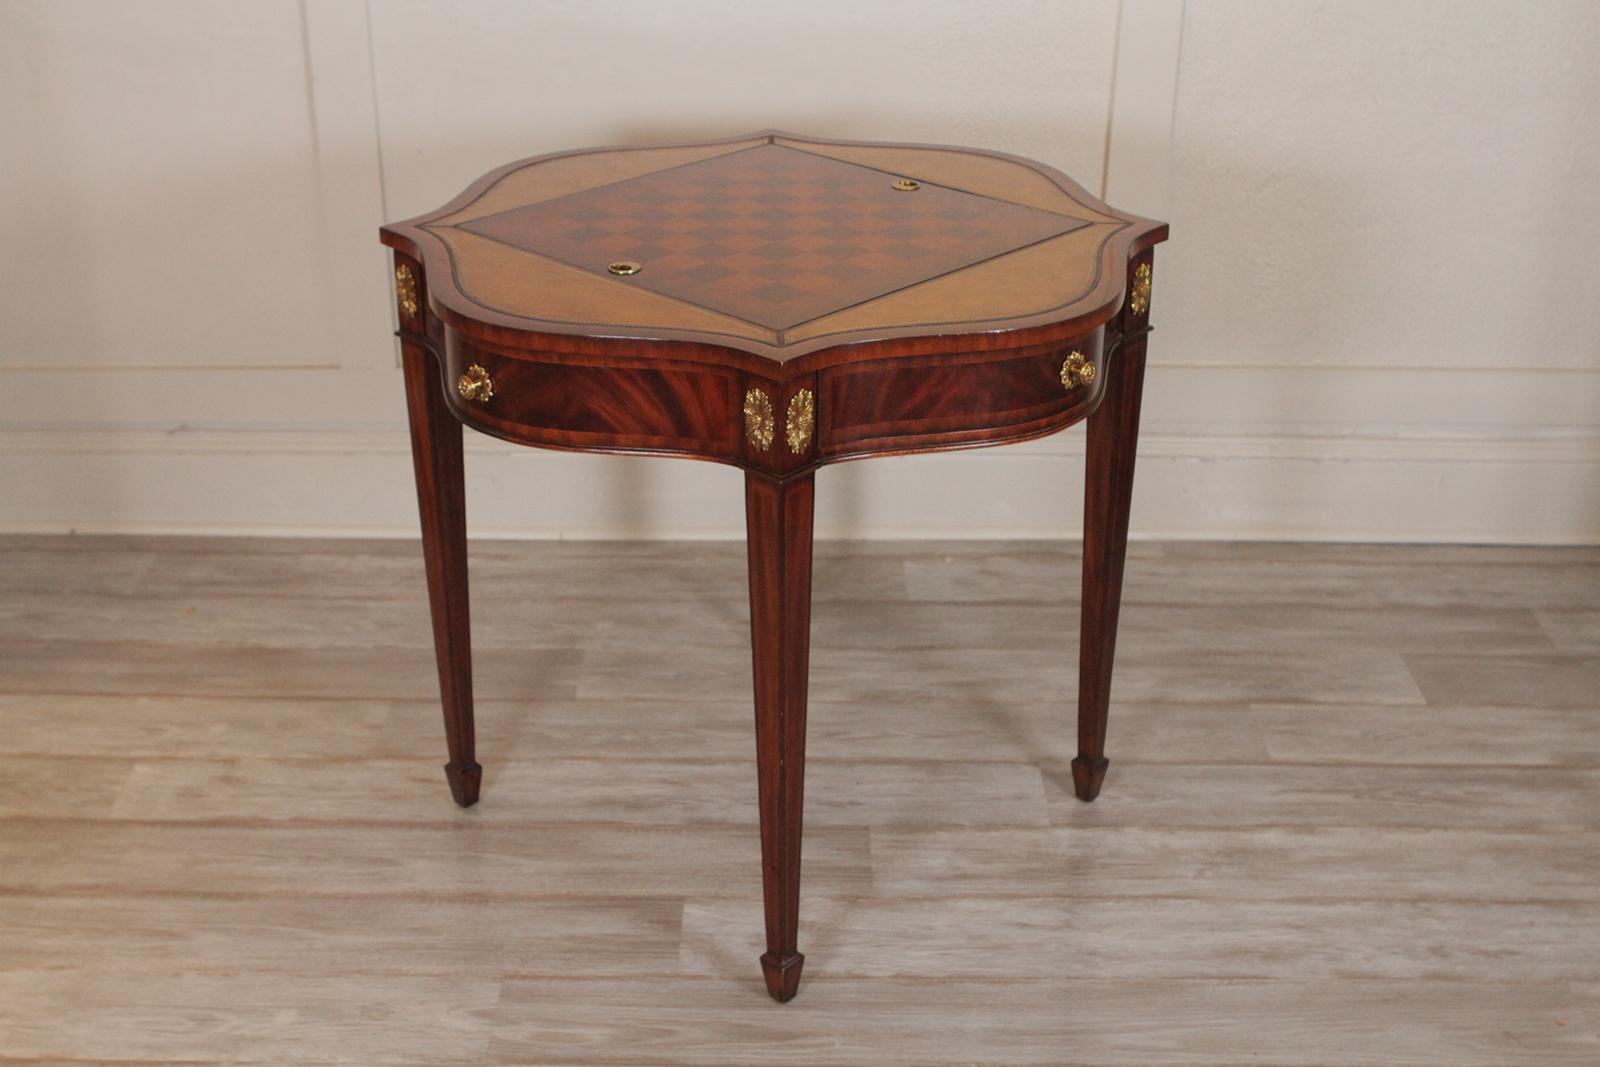 Elegant mahogany Maitland Smith game table with leather and gilt mounts. The scalloped top with reversible game board in center.
The inlaid chess board reverses to a leather covered backgammon game board.
Dimensions: 34” W x 34” D x 30” H.